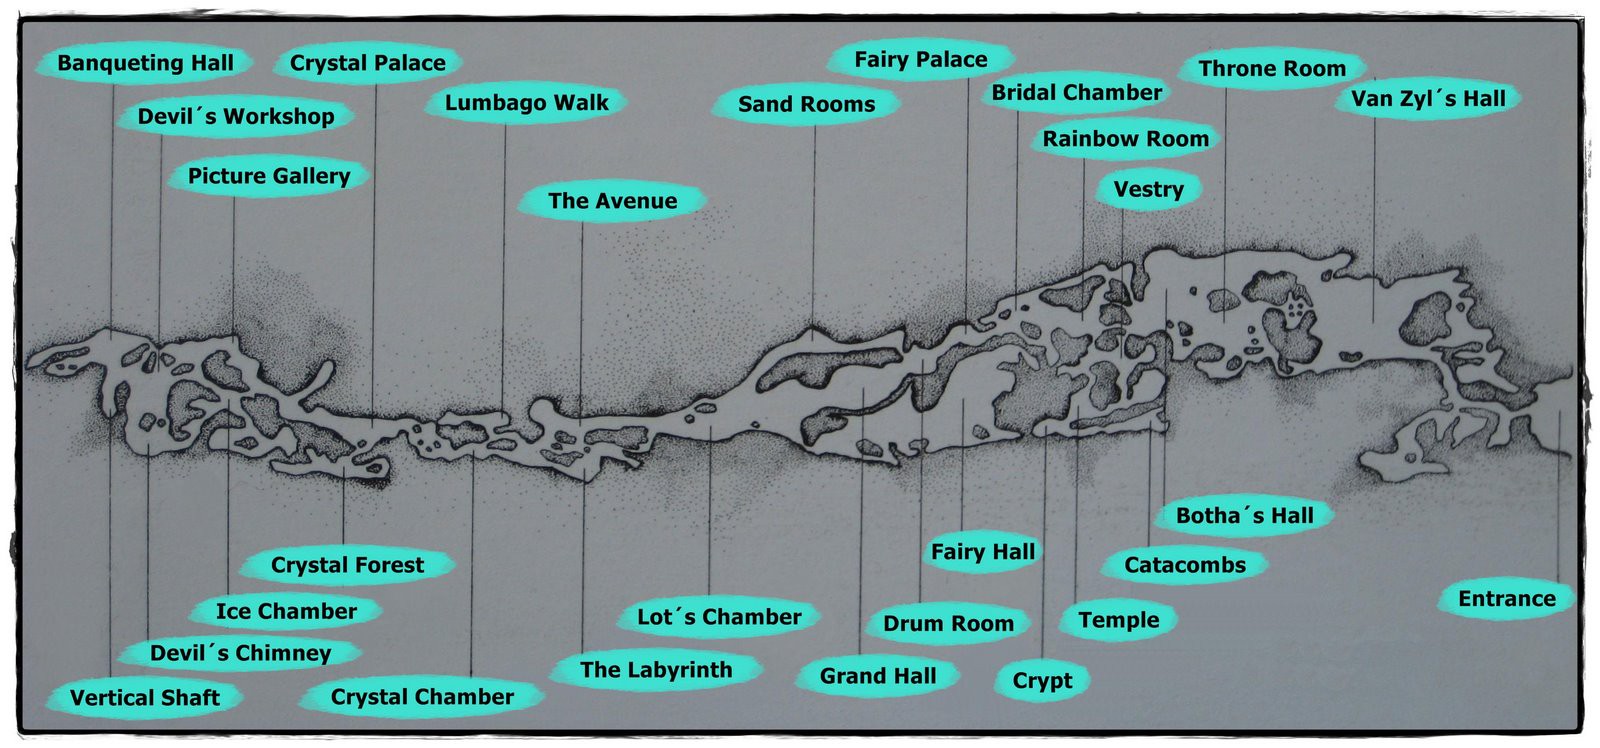 guide-map-of-cango-caves.jpg